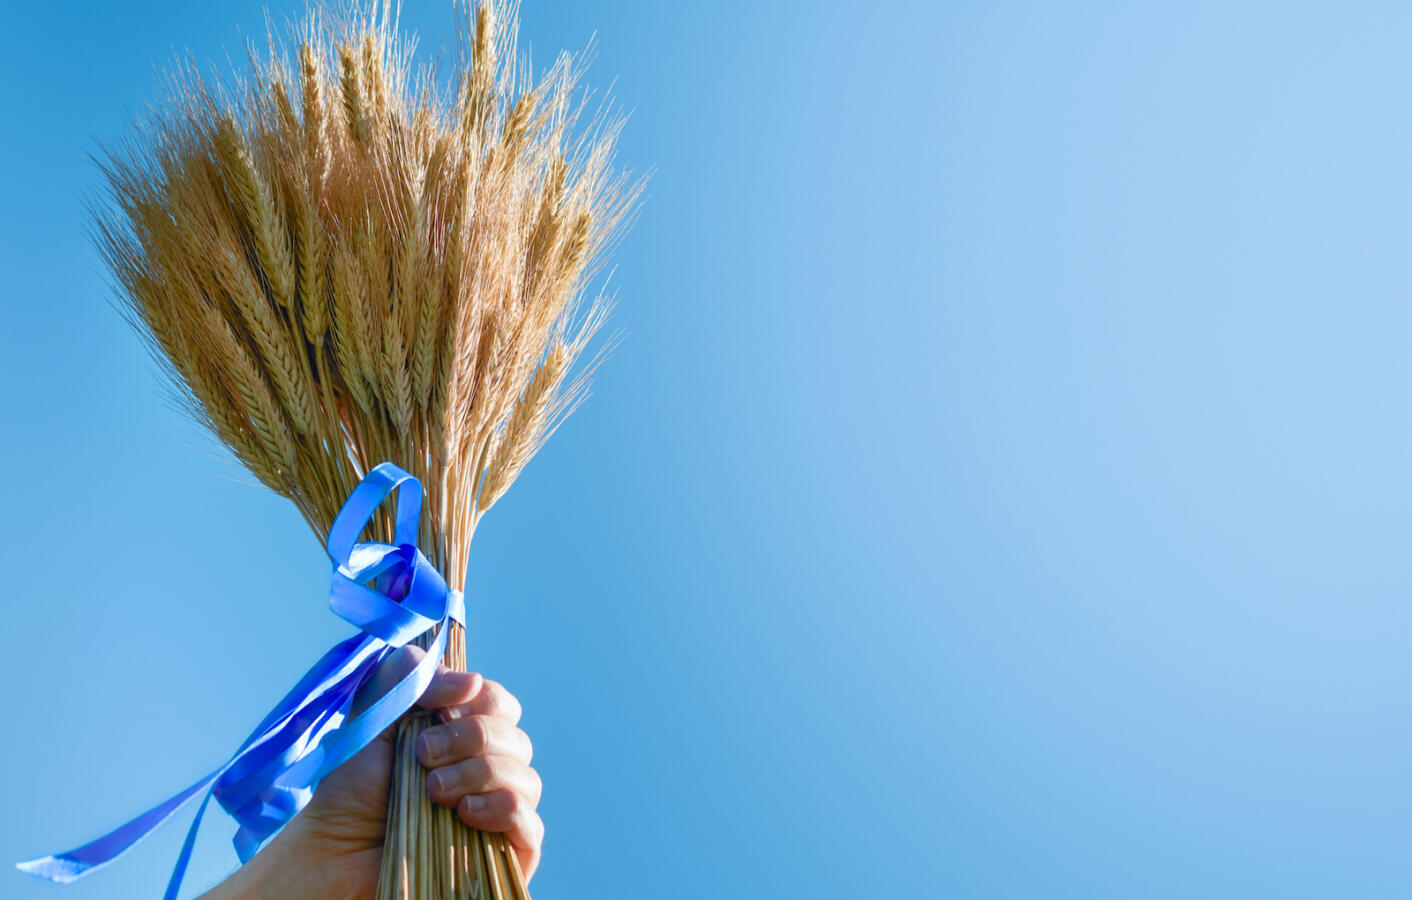 Shavuot jewish holiday celebration. Ripe bouquet of wheat with blue ribbon hold by male hand on blue summer sky backgrounds. Symbols of jewish holiday Shavuot. Shavuot Jewish Holidays concept. Mock up